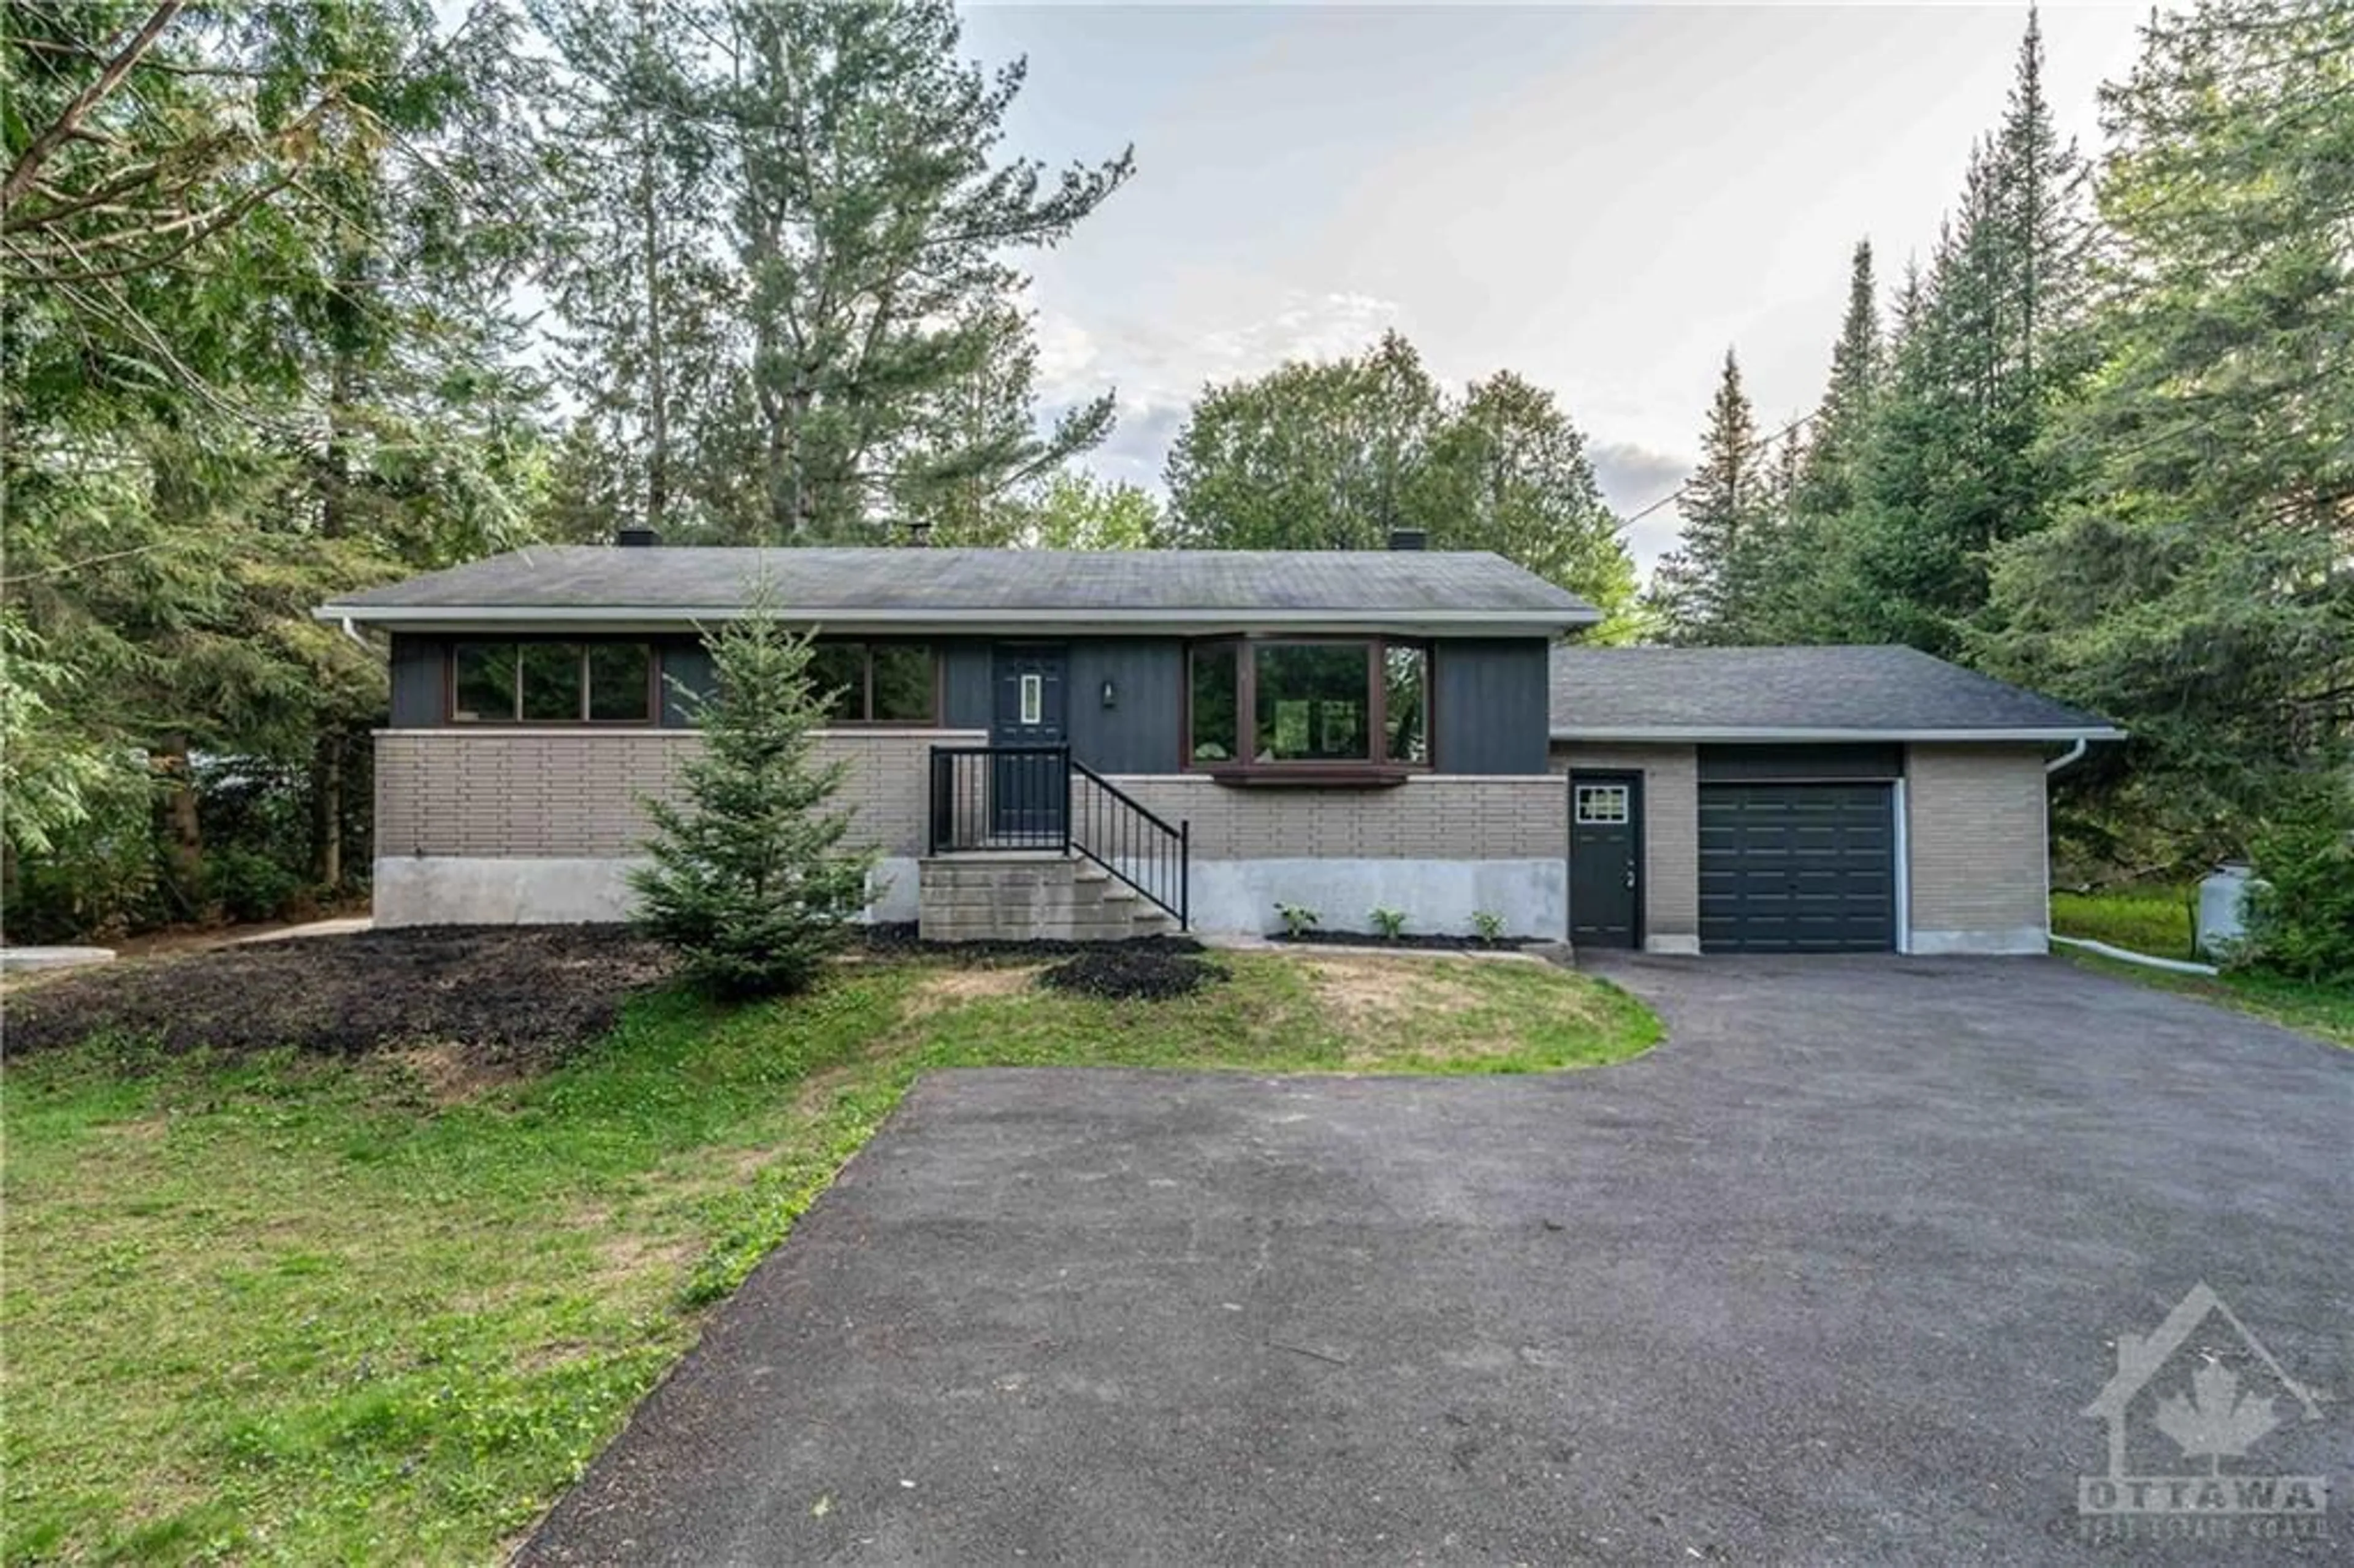 Frontside or backside of a home for 4572 ANDERSON Rd, Ottawa Ontario K0A 1K0